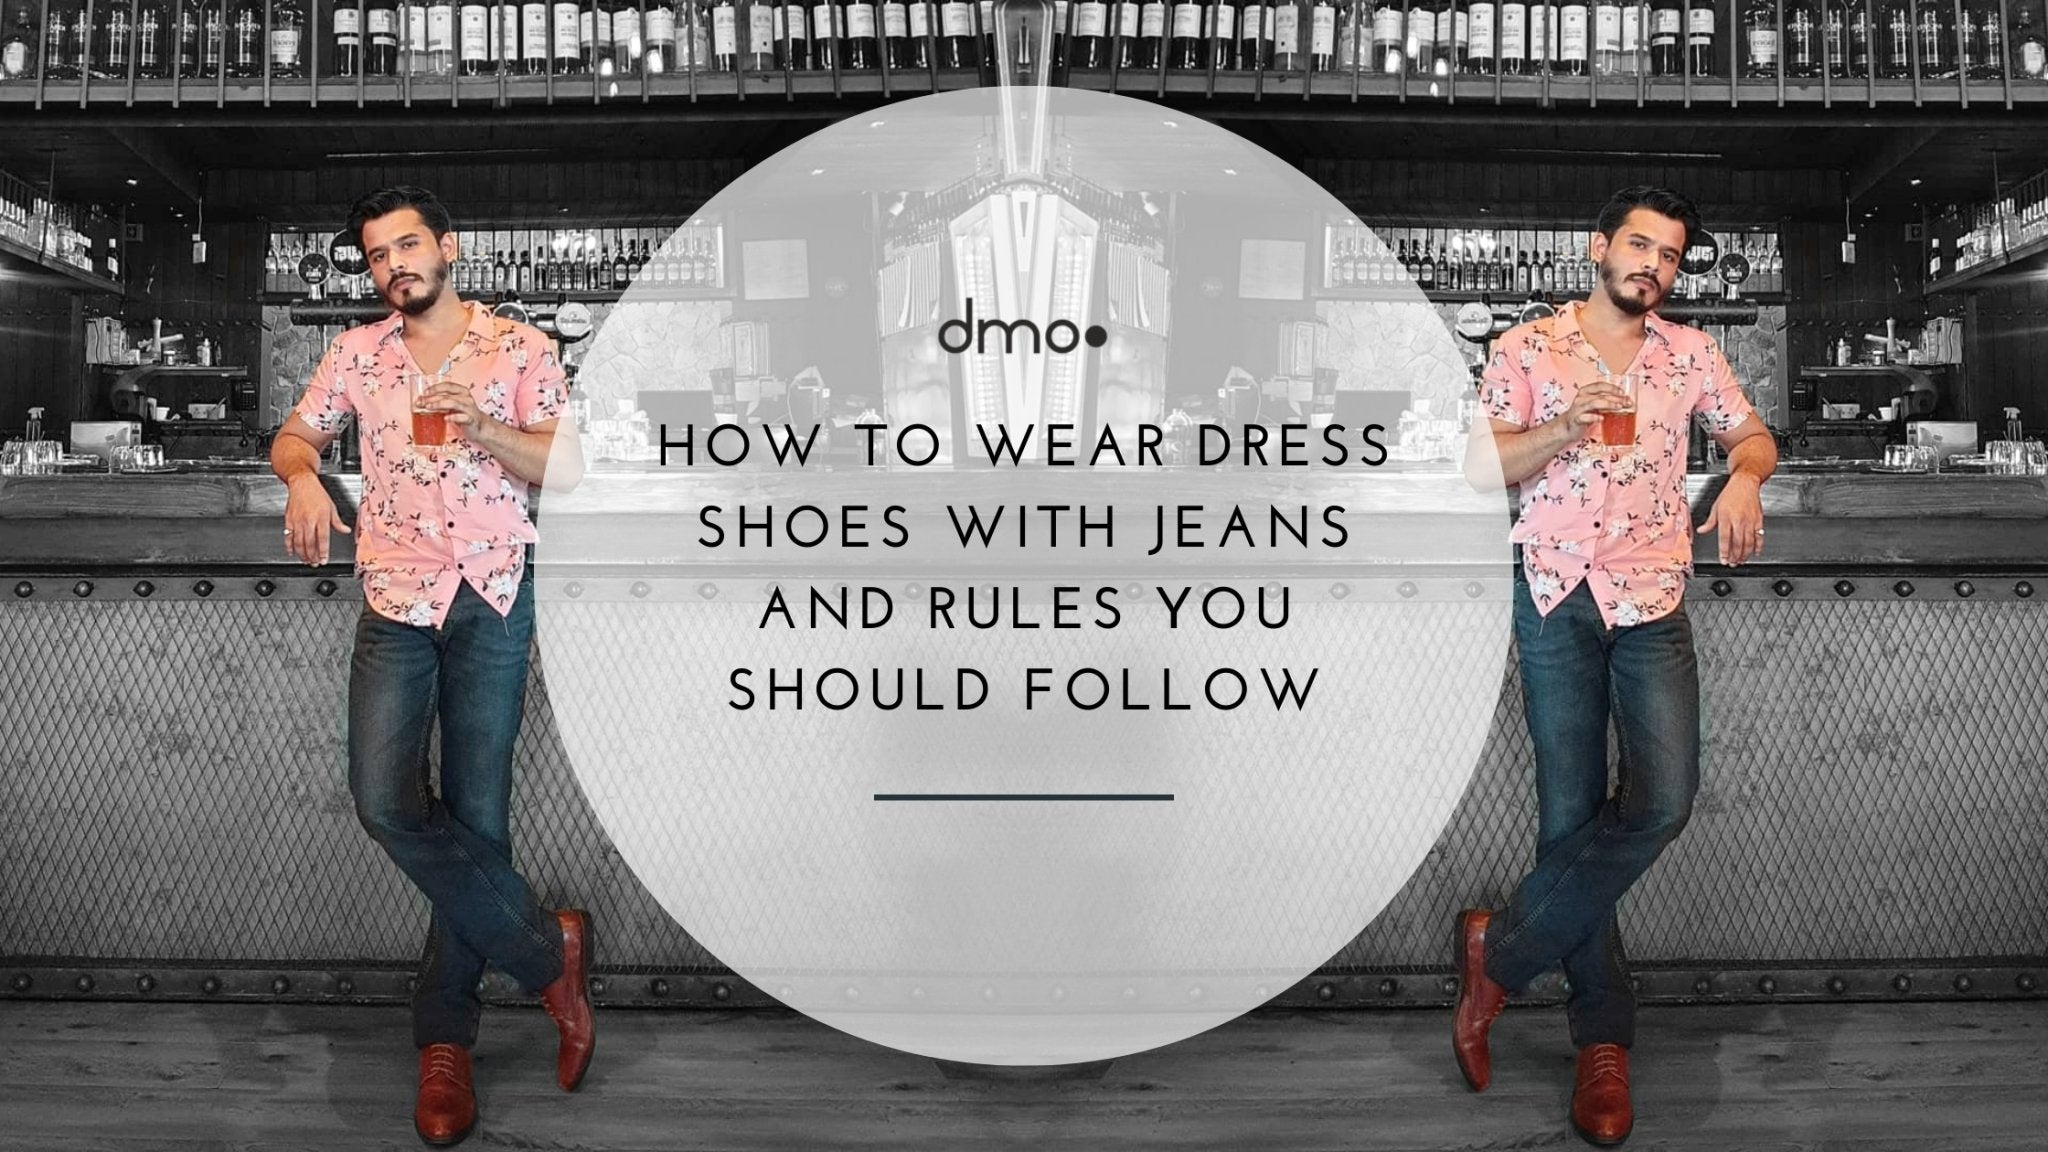 How to wear dress shoes with jeans - dmodot Shoes